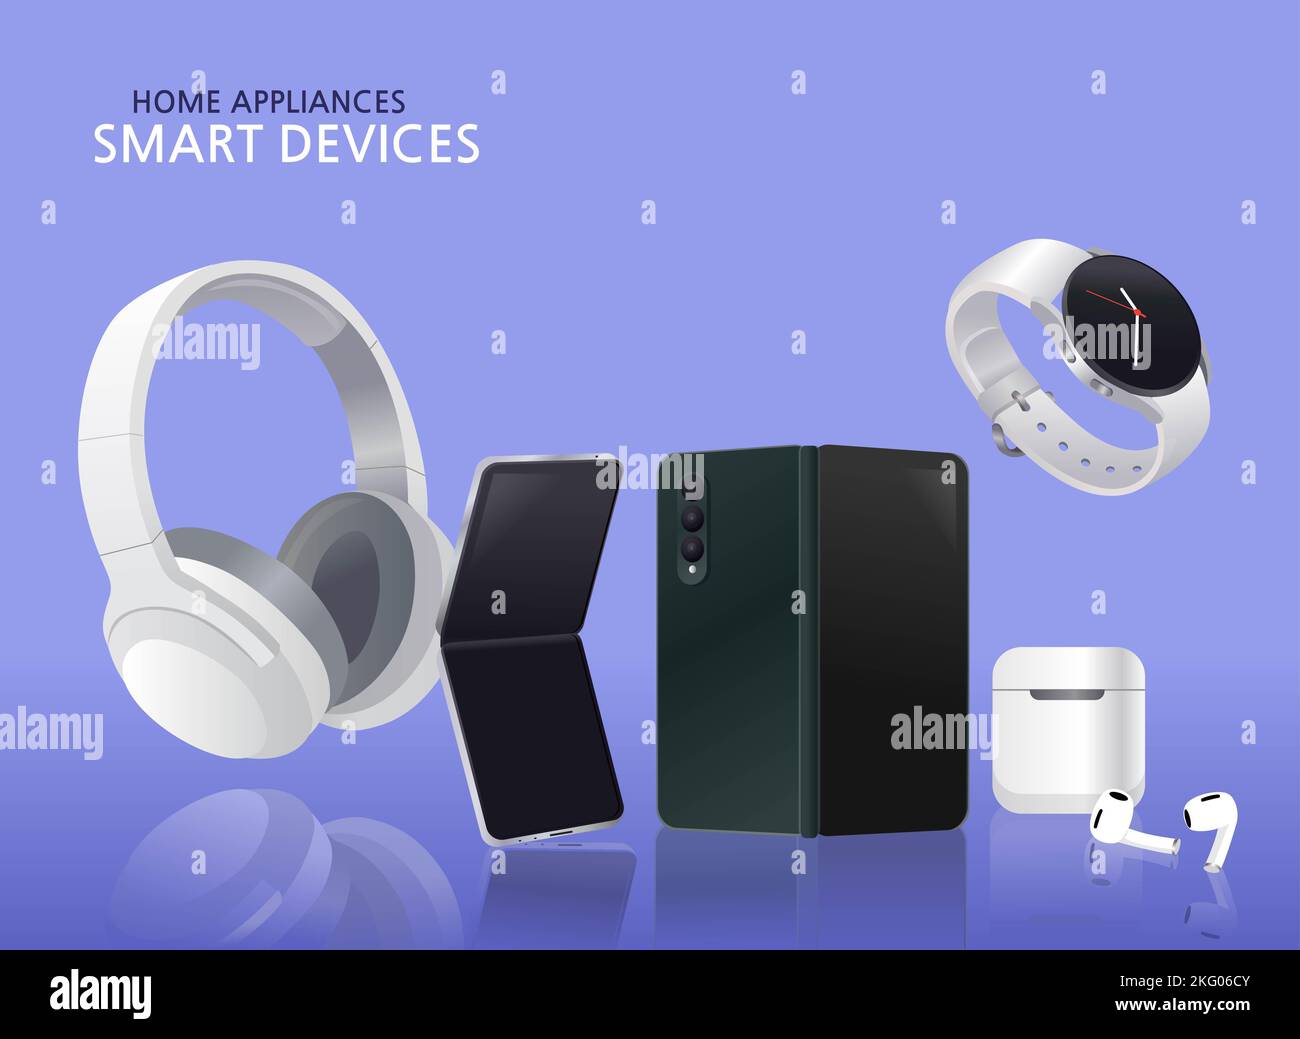 home appliances, devices vector illustration smart devices, phone, headset, bluetooth earphones Stock Photo